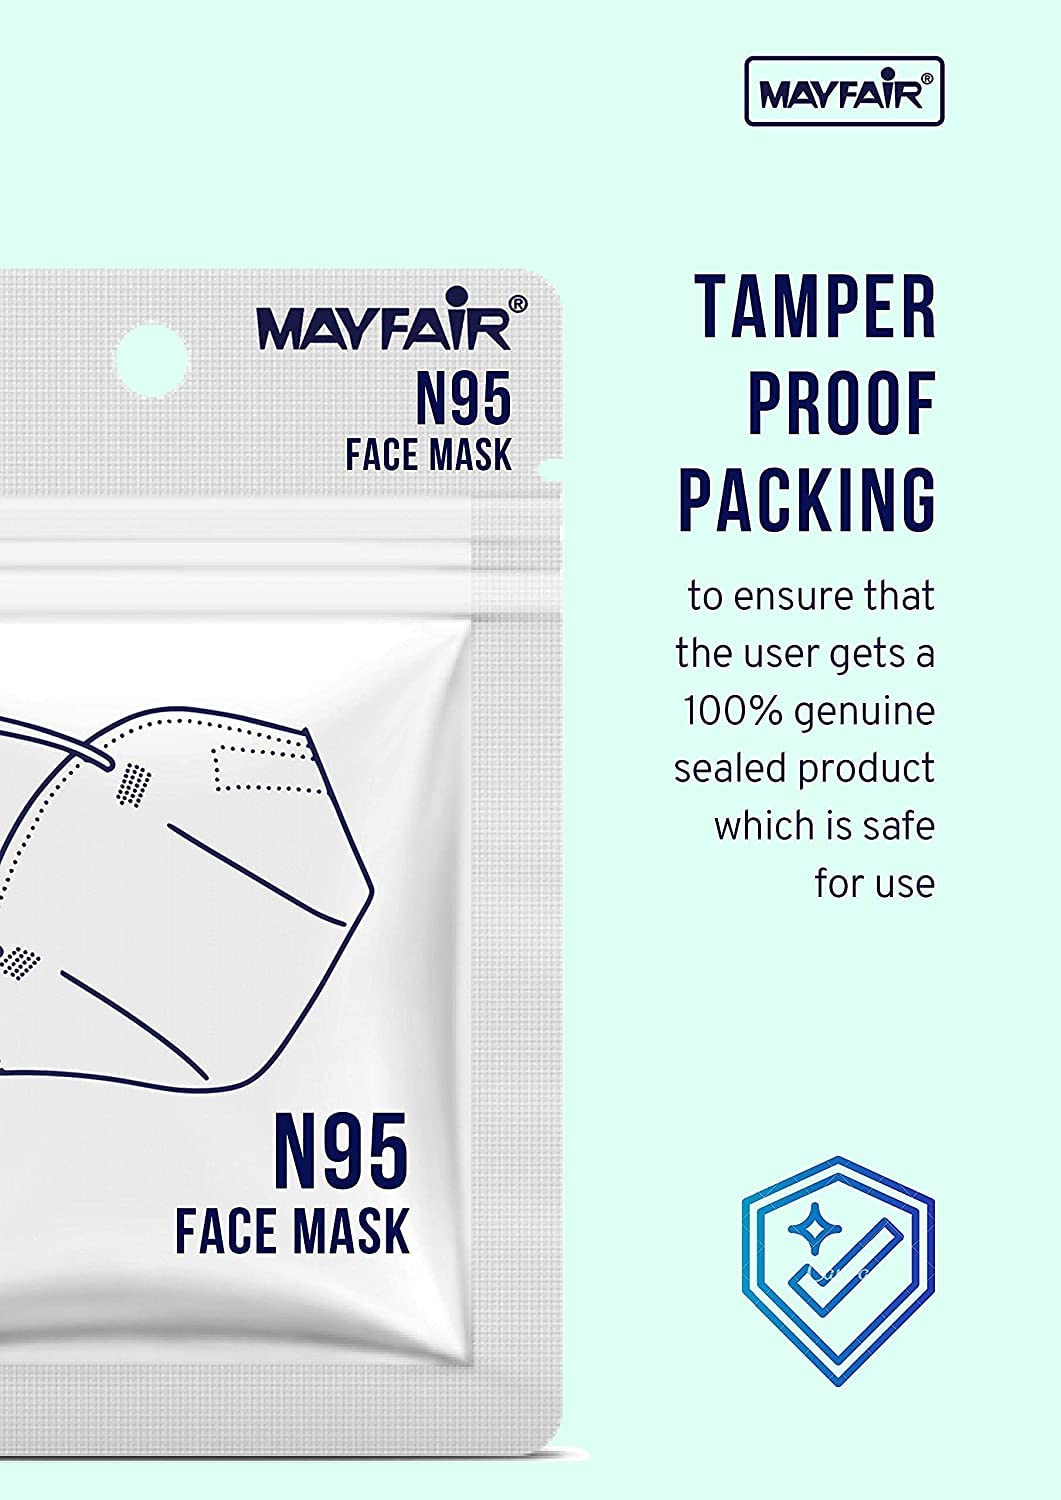 SWHF Mayfair N95 Reusable Face Mask Head Loop and Valve, Protective 5 Layered Filtration with Melt Blown and 5 Protective Layers Masks for Unisex (Pack of 10, Head Loop)